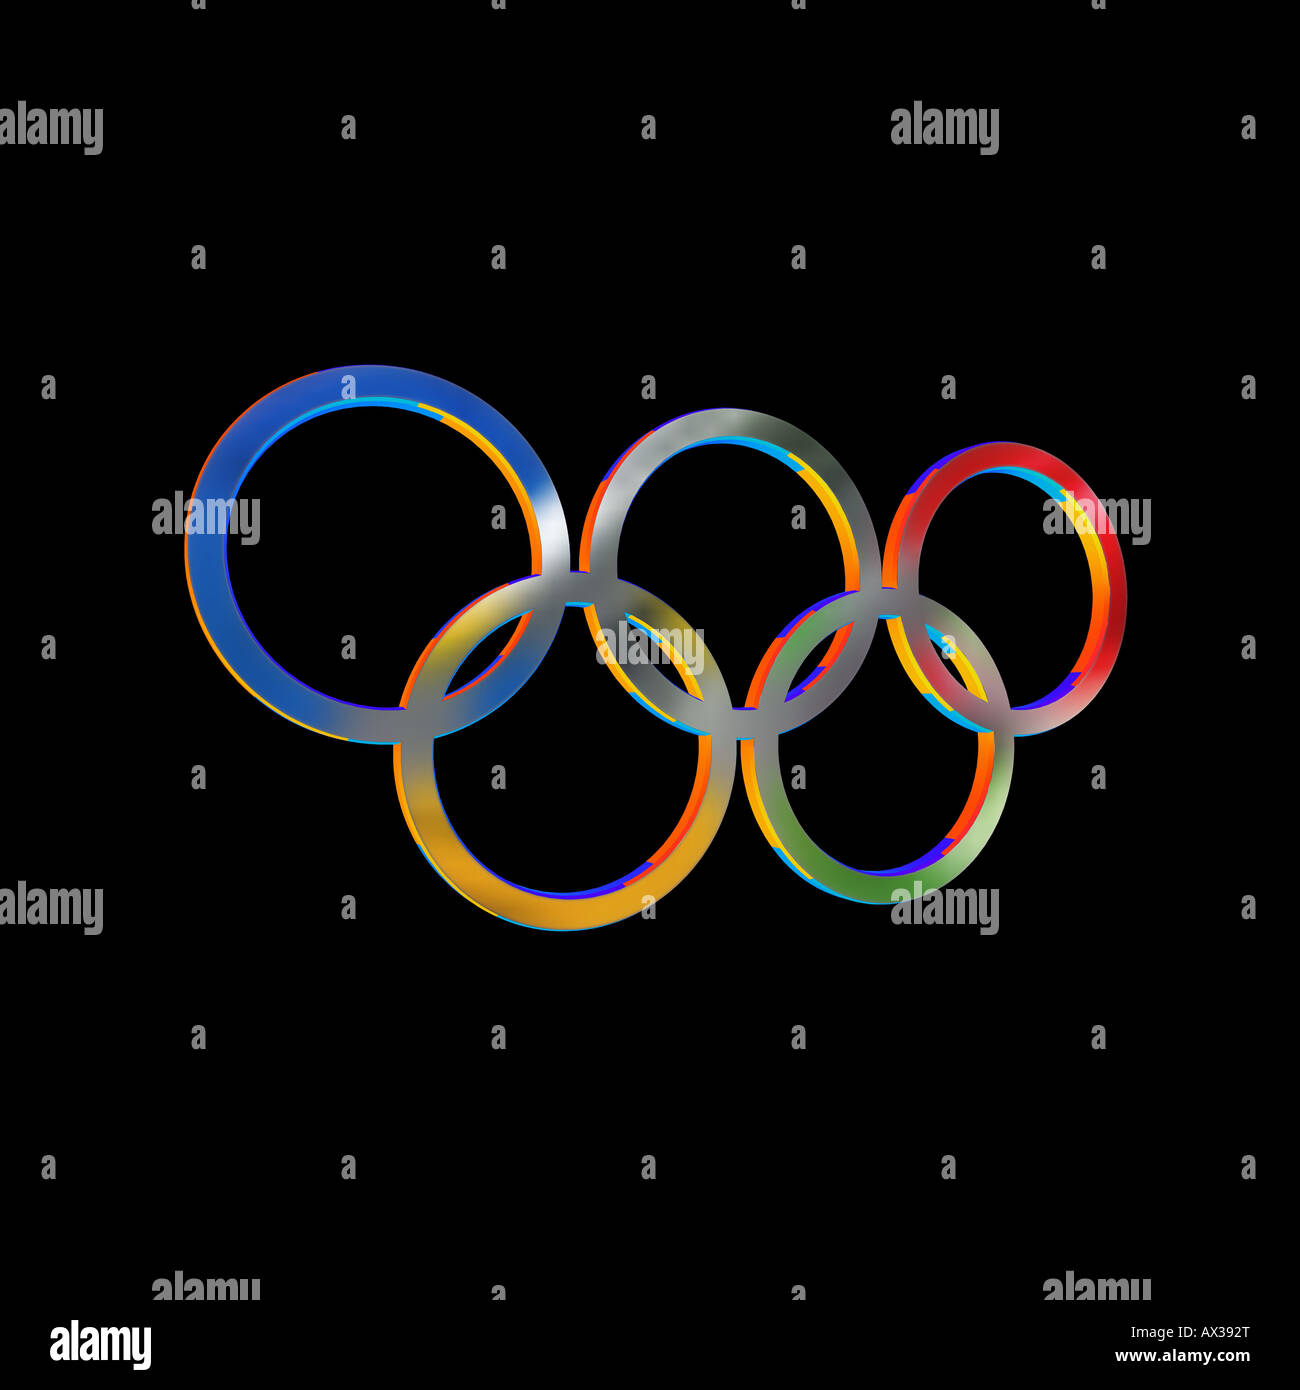 A Remarkable Moment When There Were Six Rings! | SoraNews24 -Japan News-